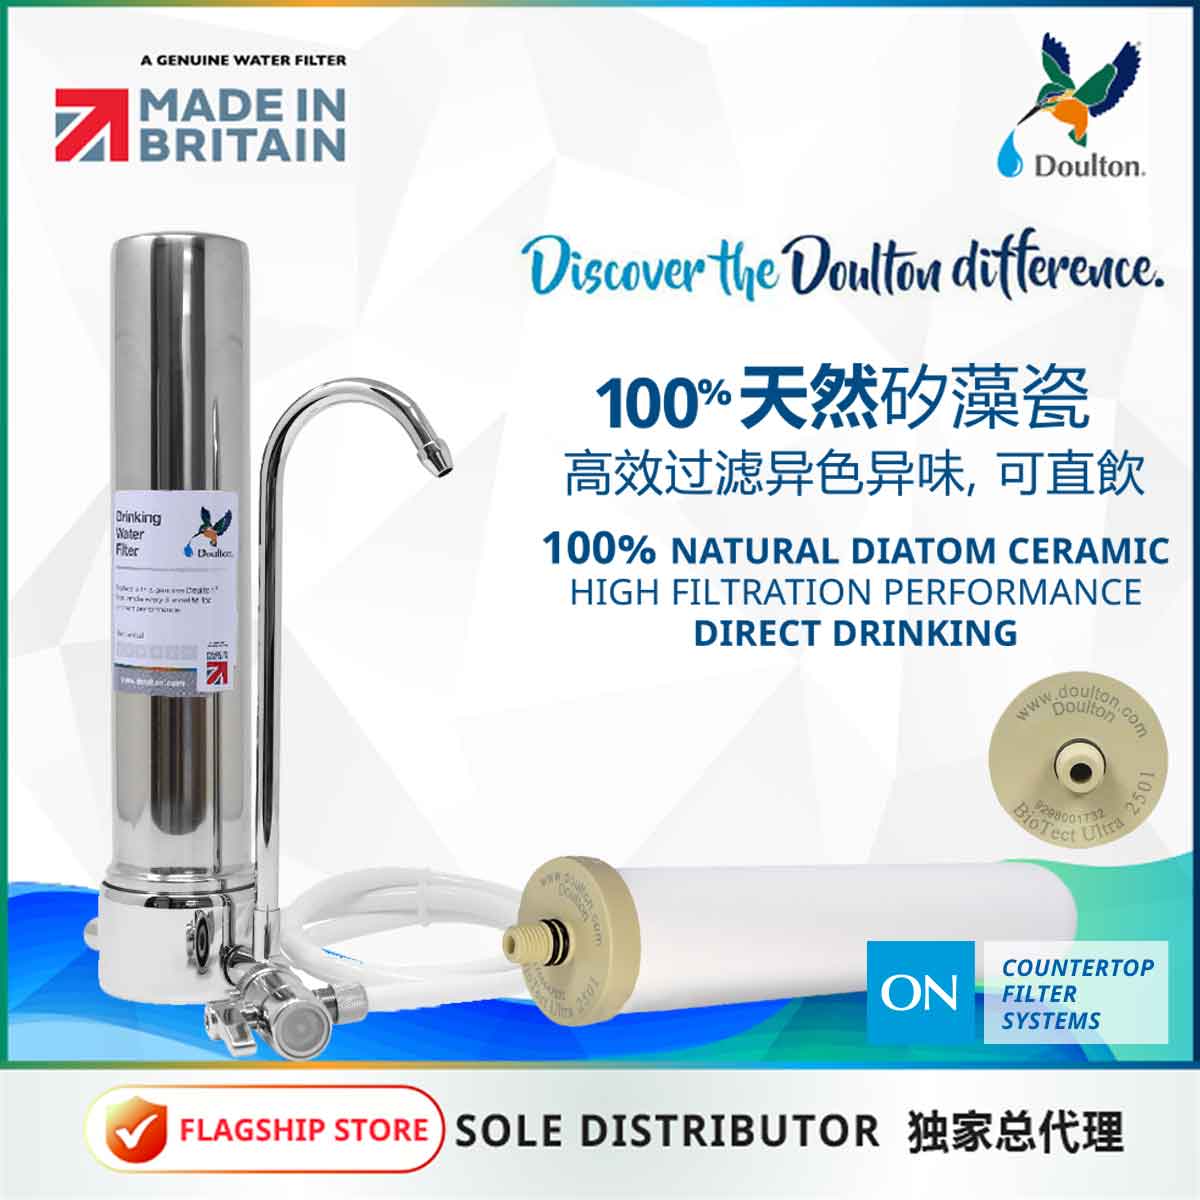 (FREE 1 eXtra BTU Filter *$119, 2nd Year) Experience the British Legacy of Purity: Doulton DCS Stainless Steel Biotect Ultra 2501 (NSF) Drinking Water Purifier - Craftsmanship Since 1826